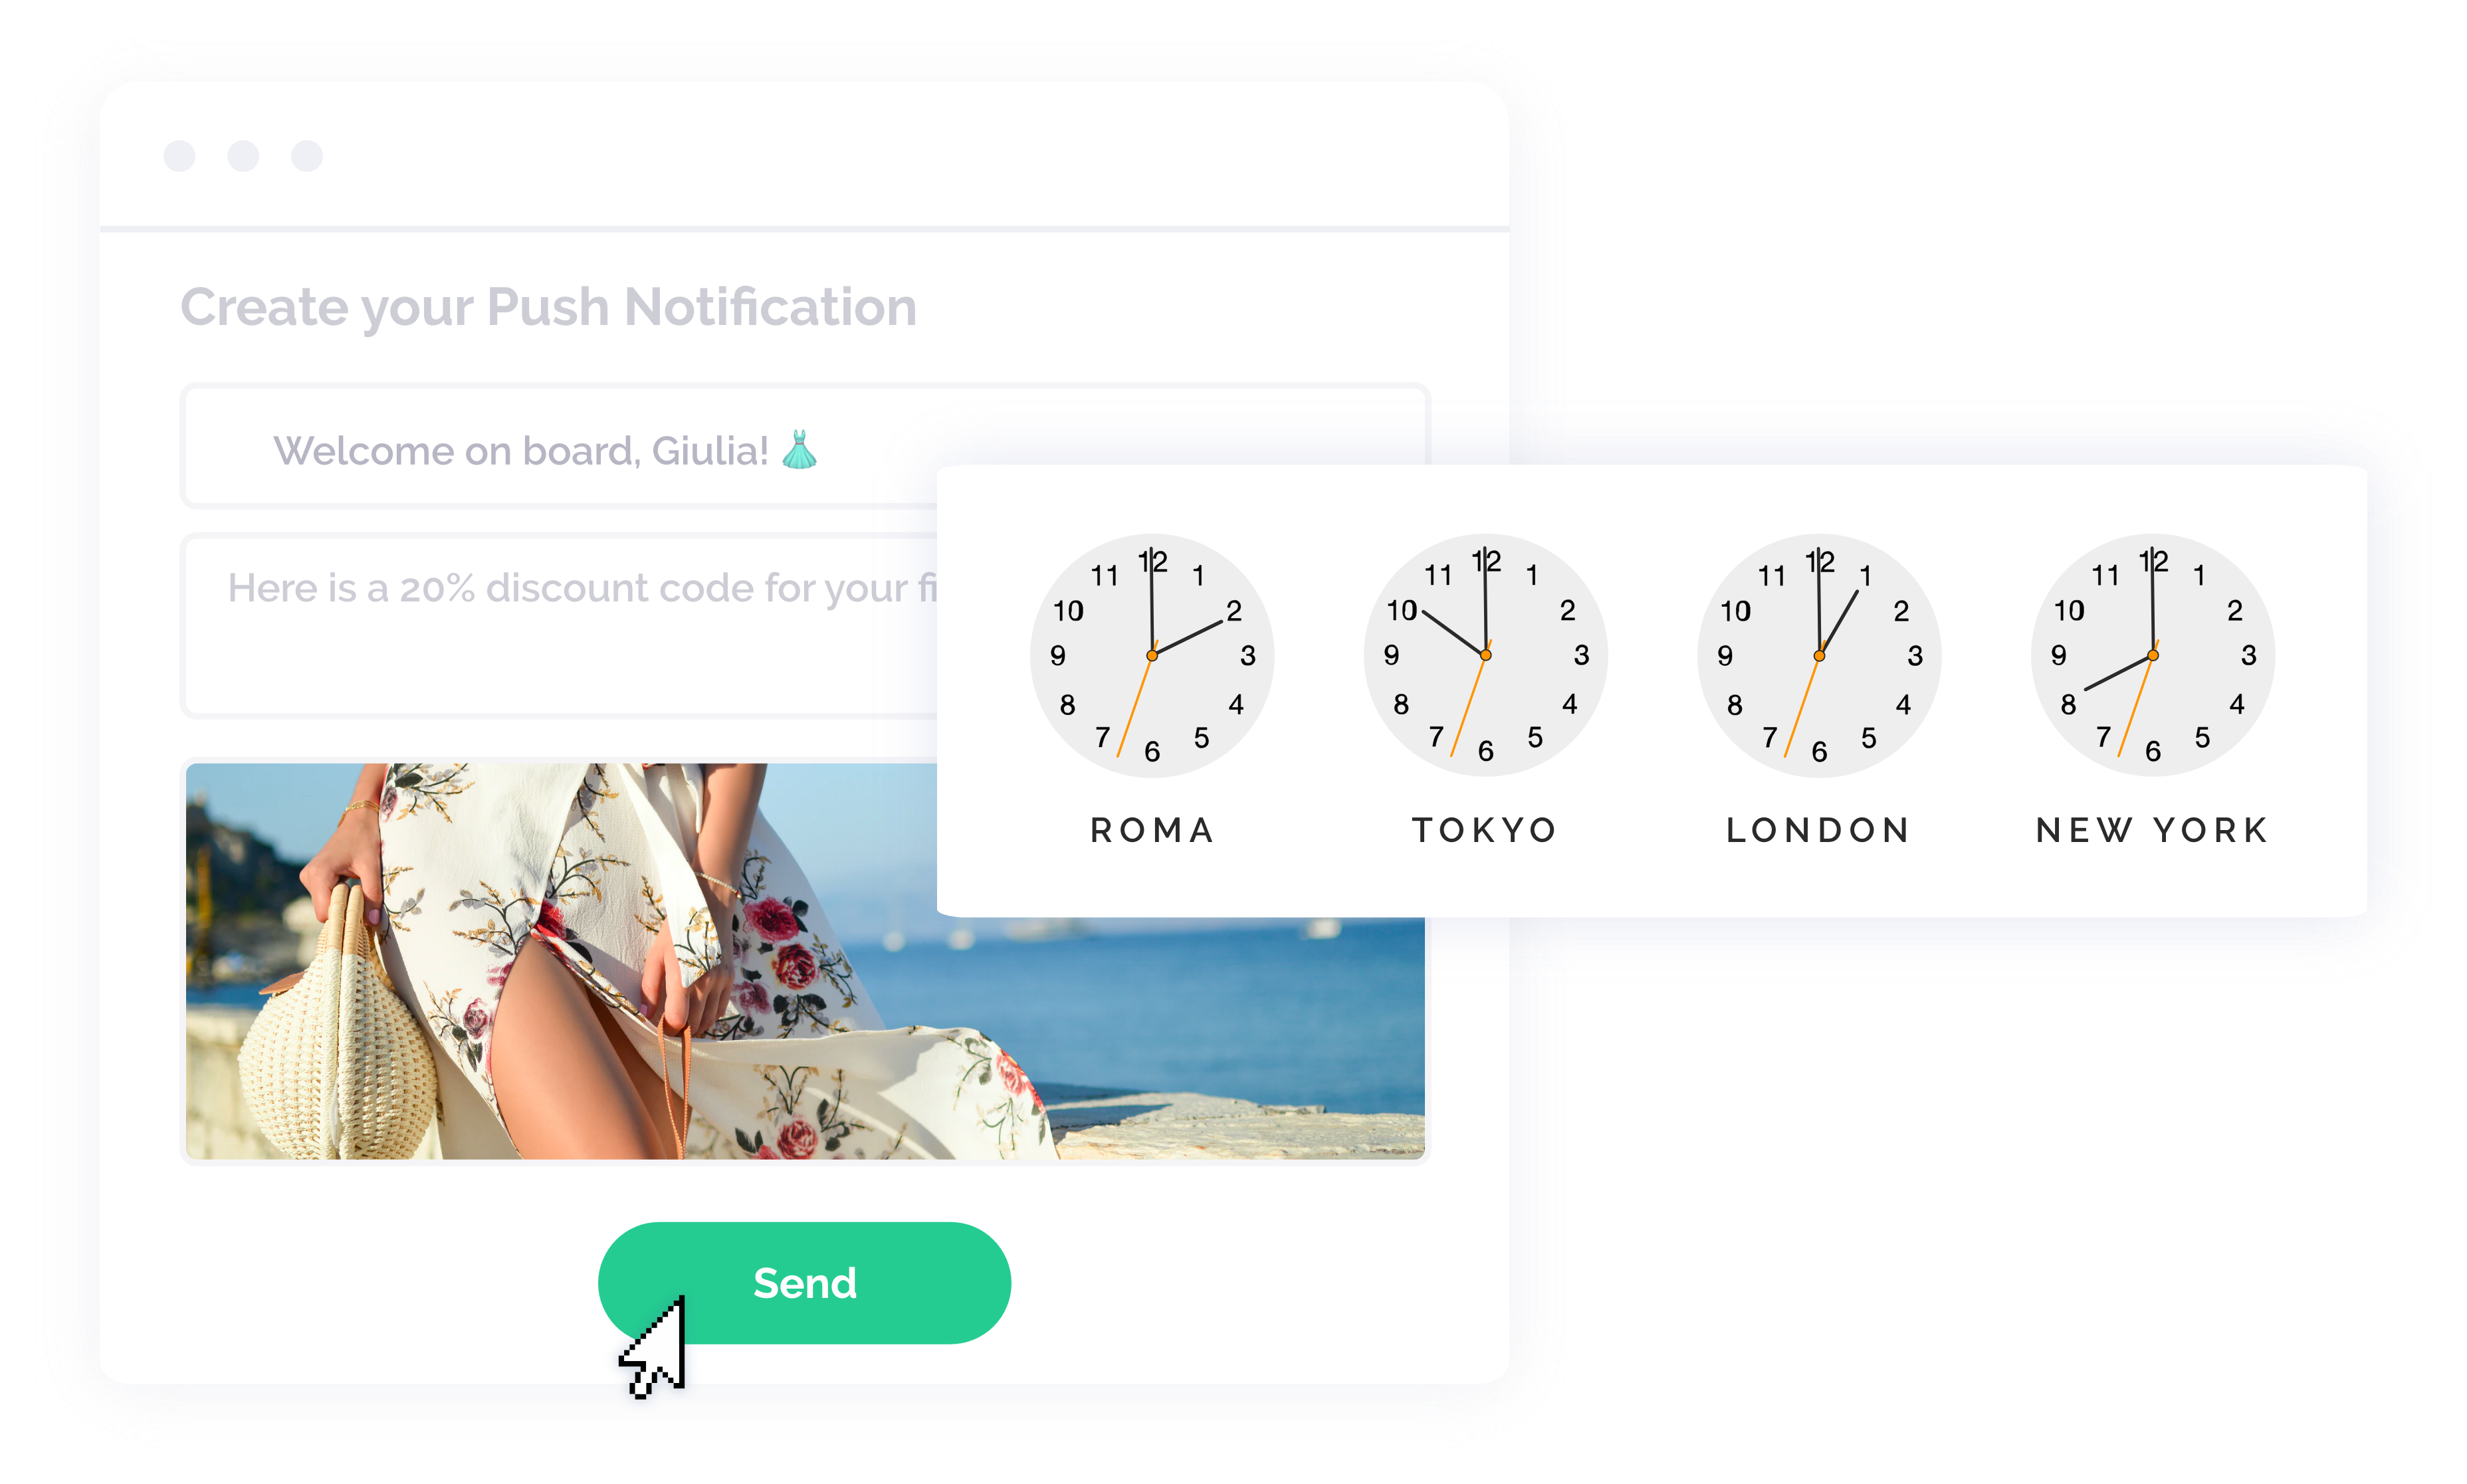 Scheduling push notifications